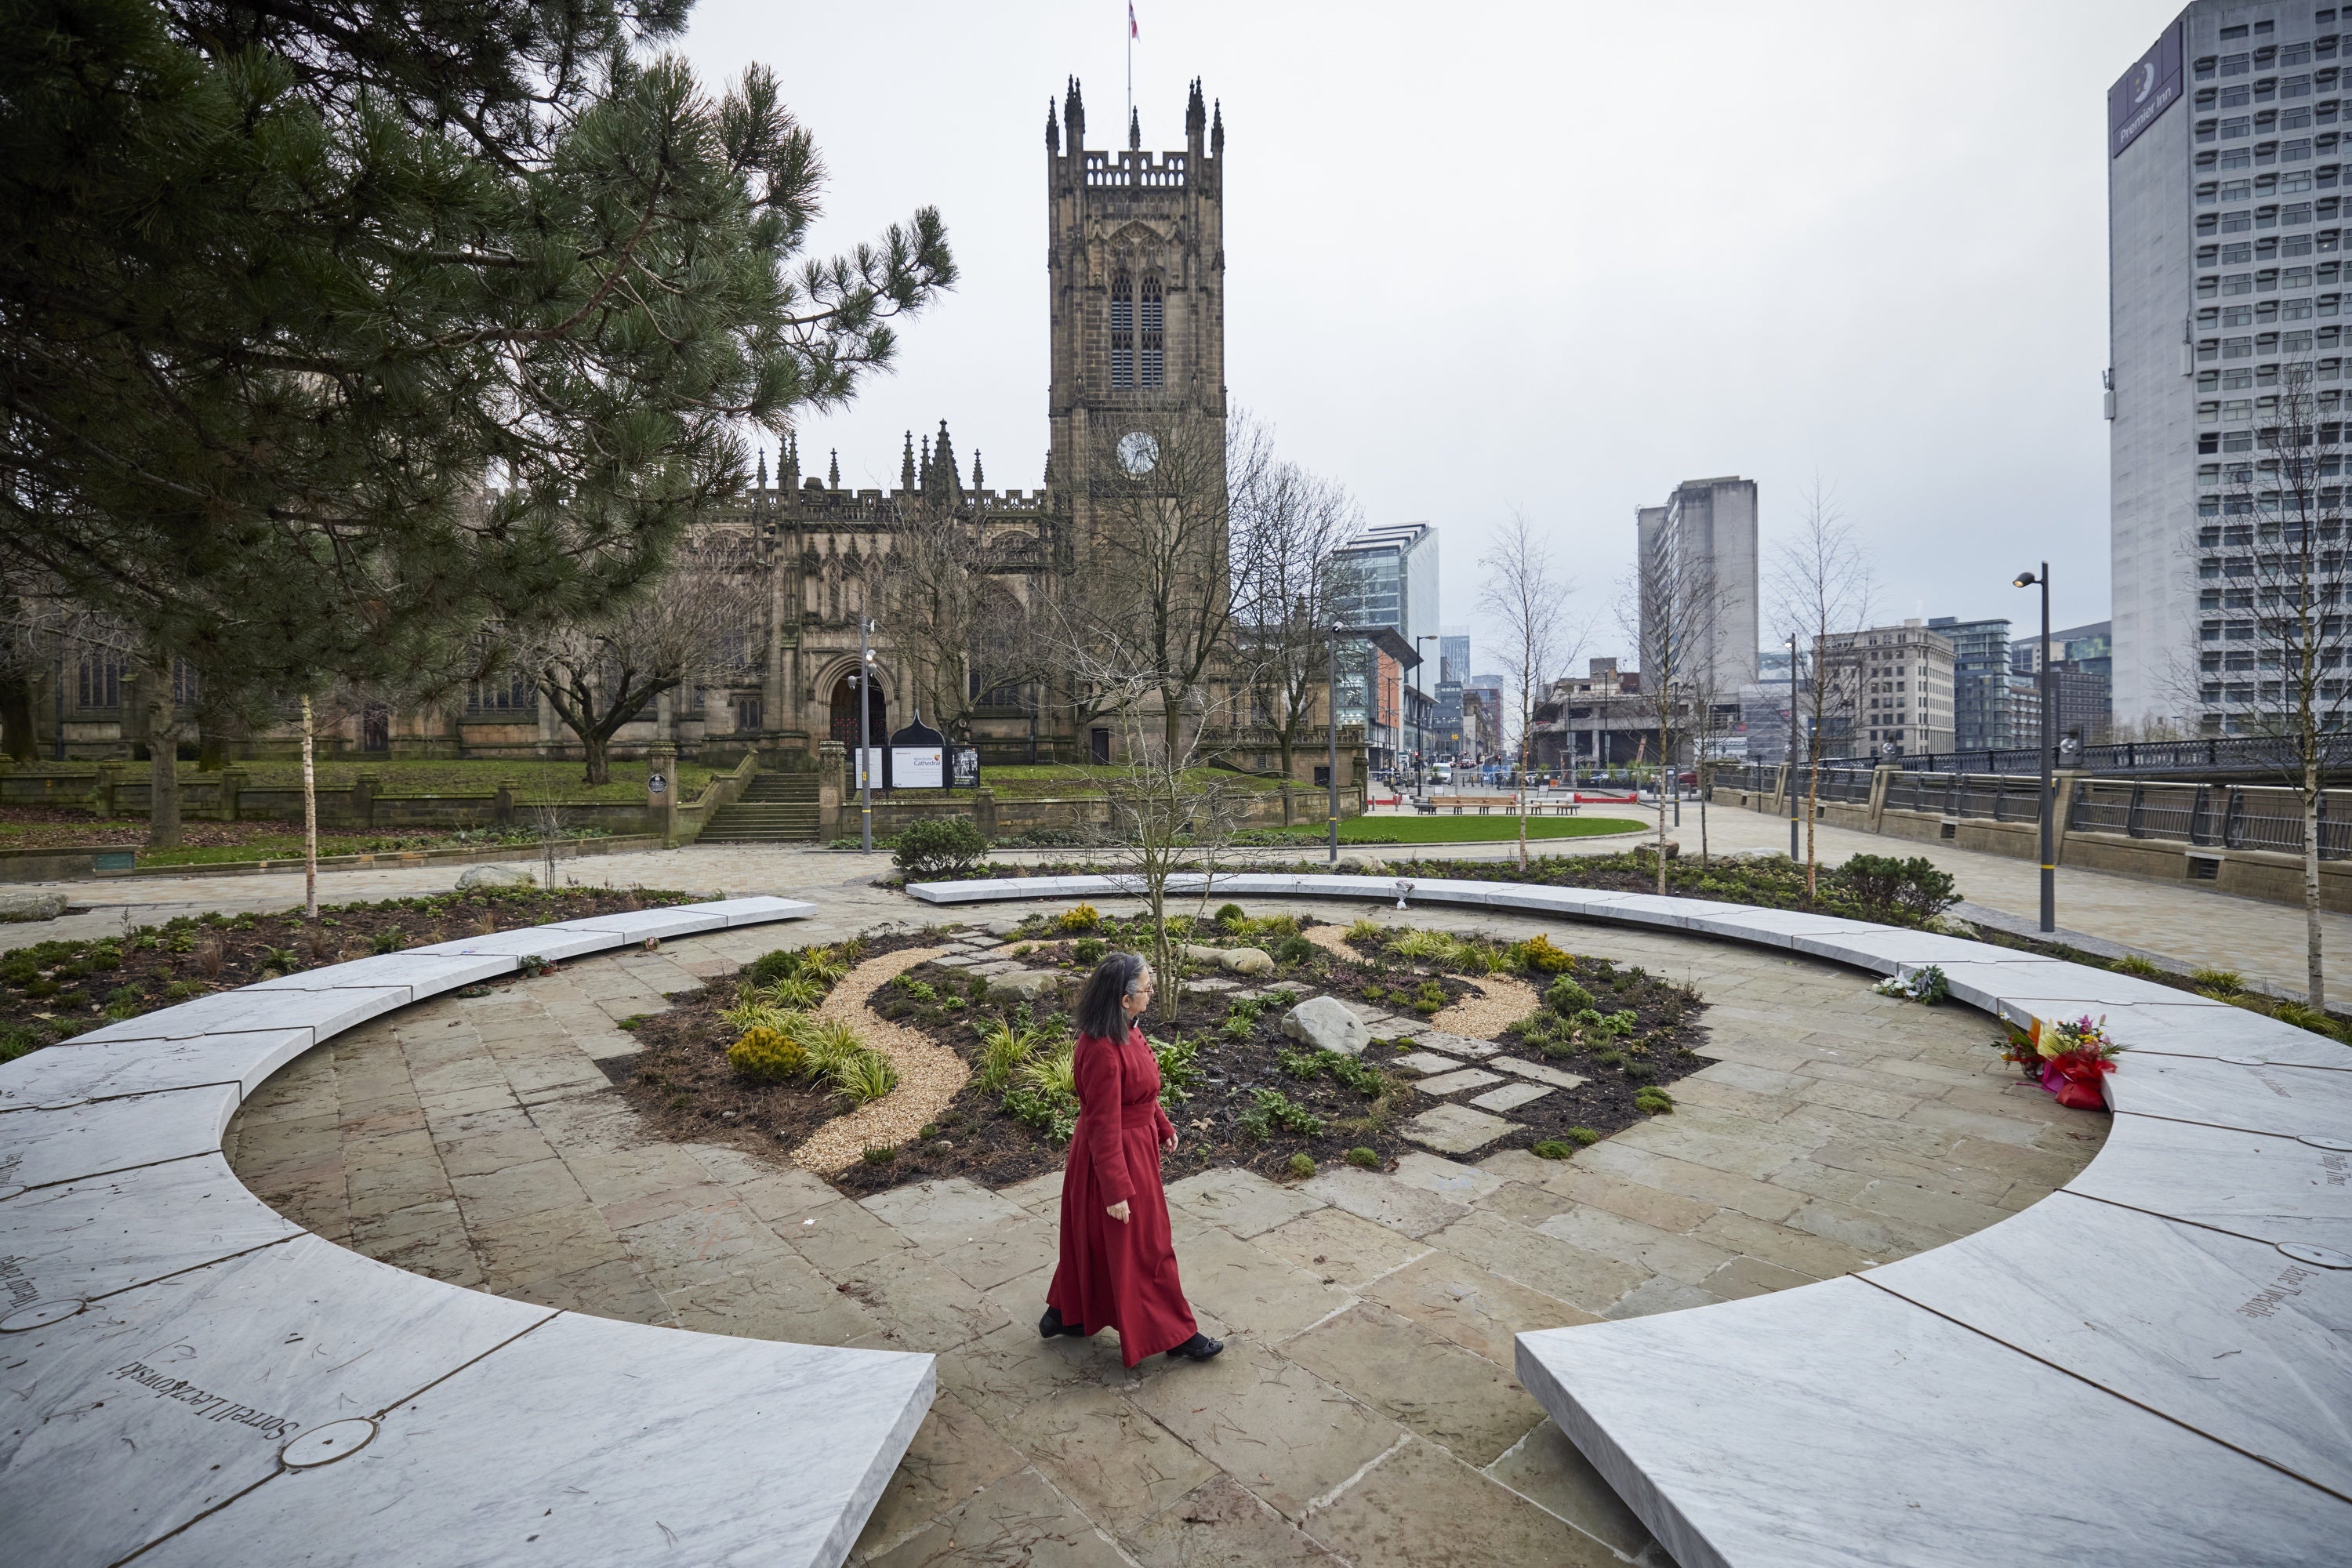 The Glade of Light is a living memorial to the victims of the 2017 Manchester Arena terror attack